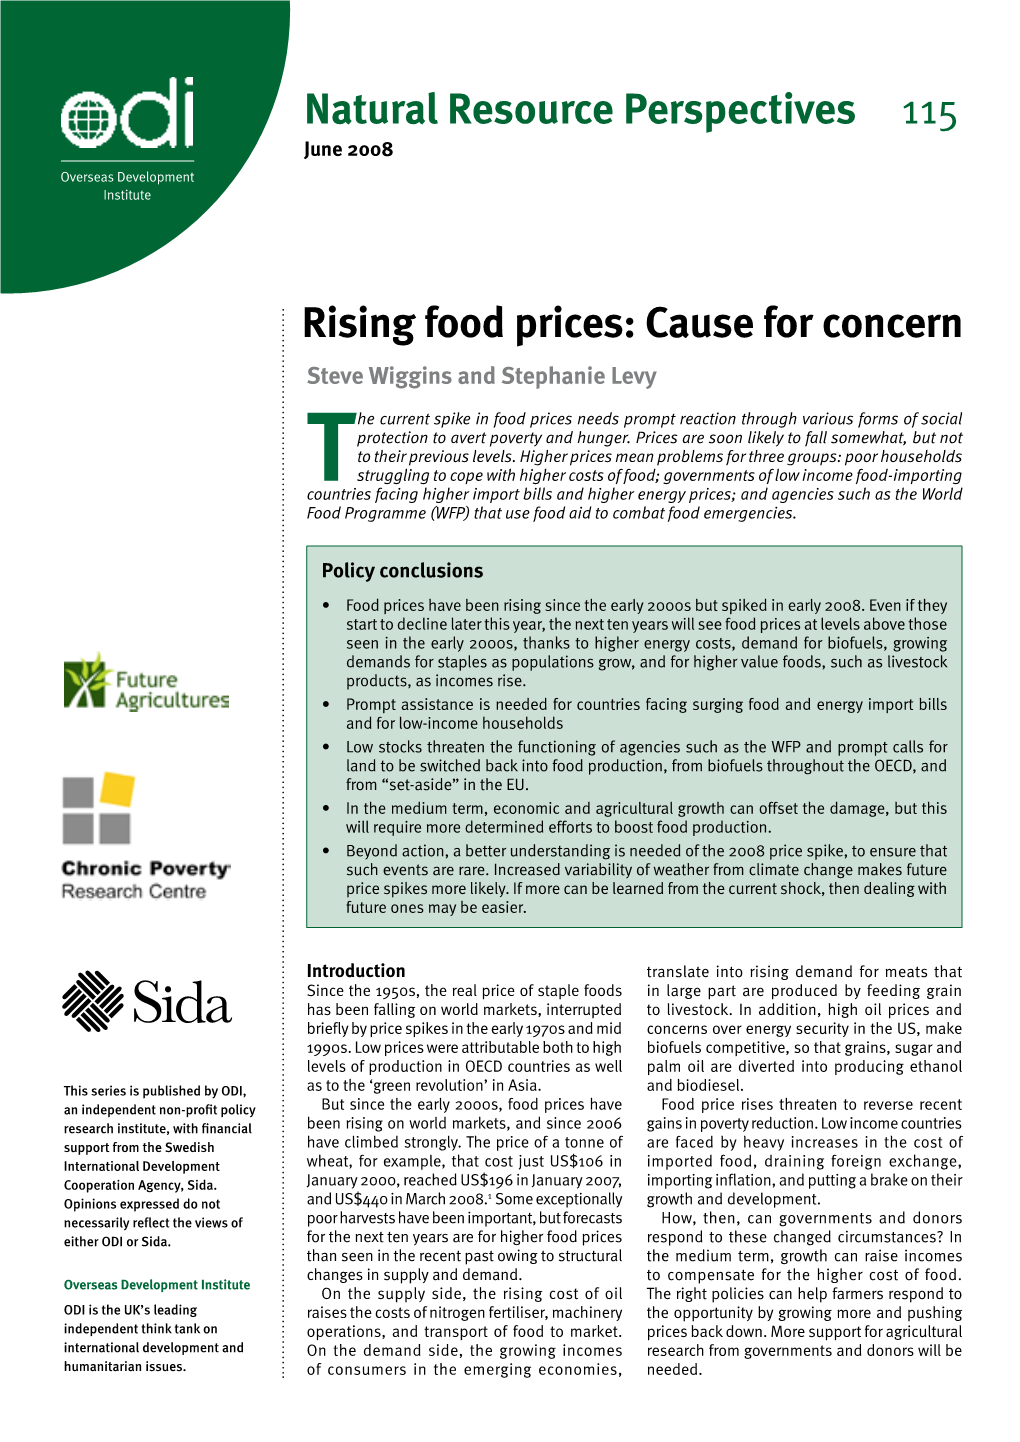 Rising Food Prices: Cause for Concern Steve Wiggins and Stephanie Levy